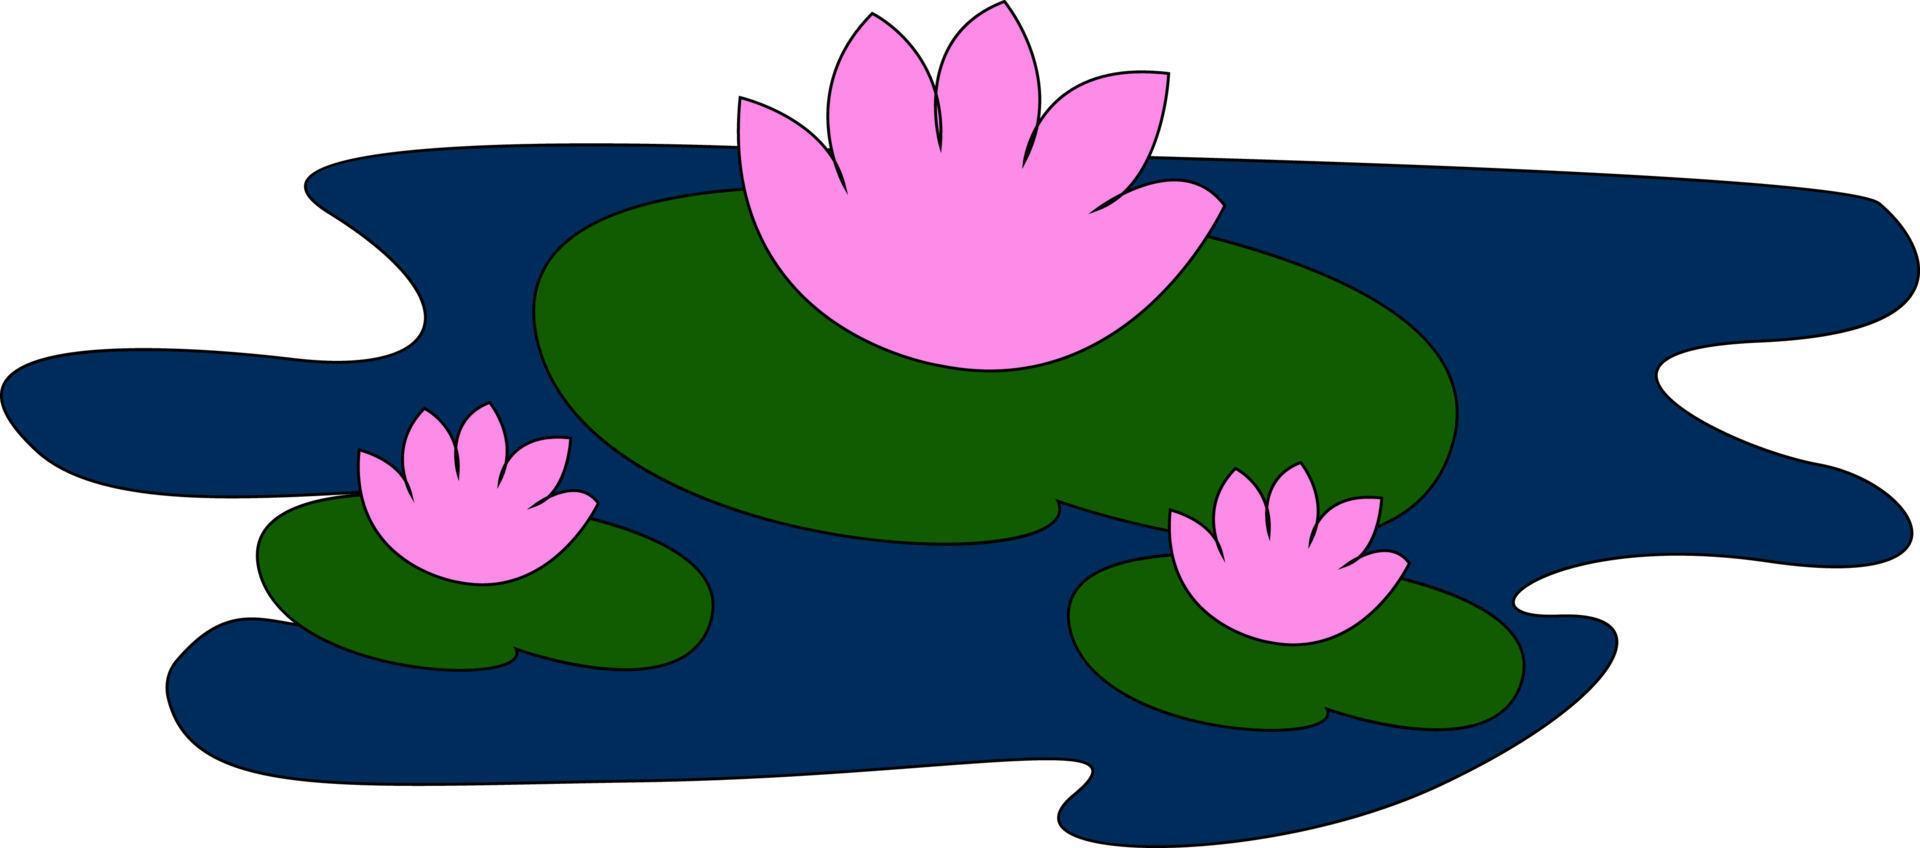 Water lilies, illustration, vector on white background